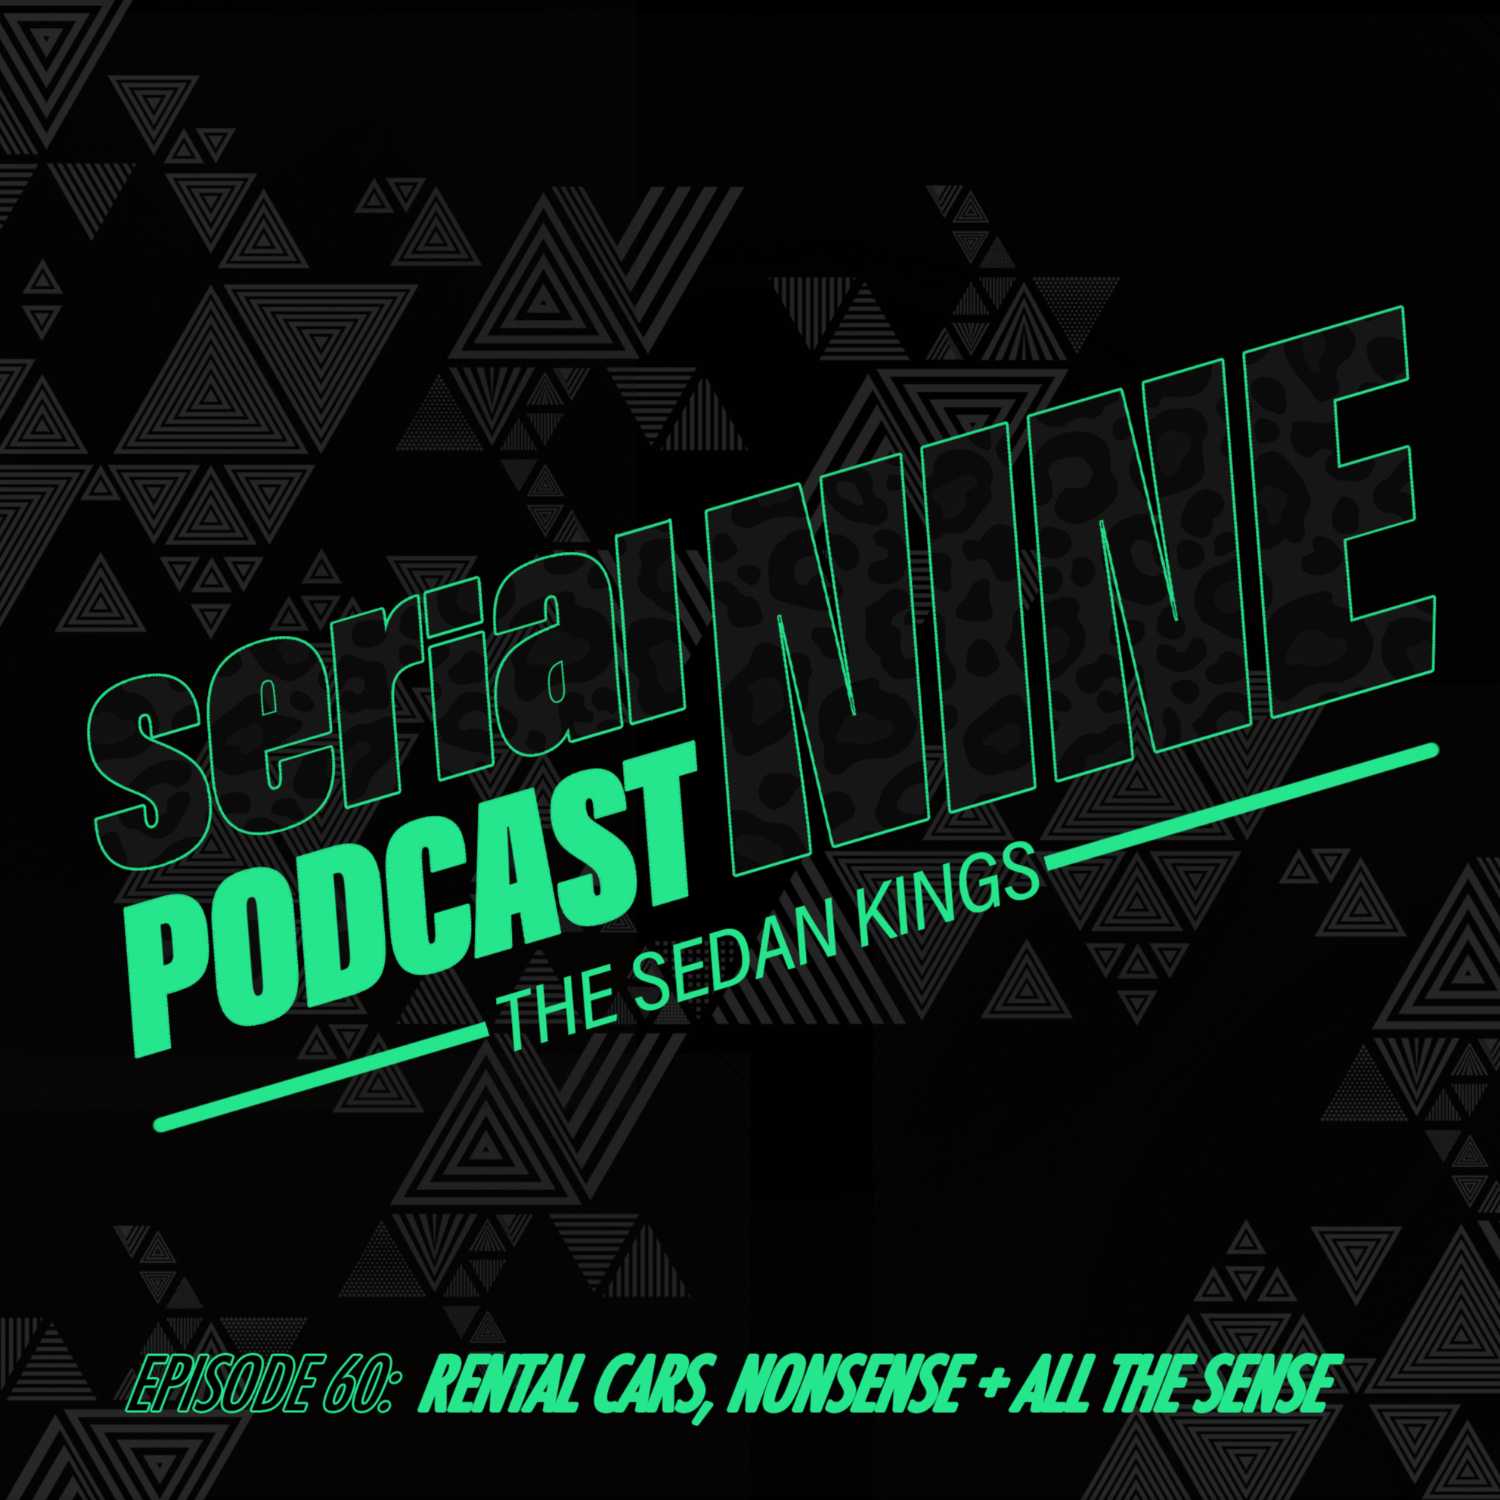 SerialPodcastNine  Episode 60 Rental Cars, Nonsense and then All the Sense